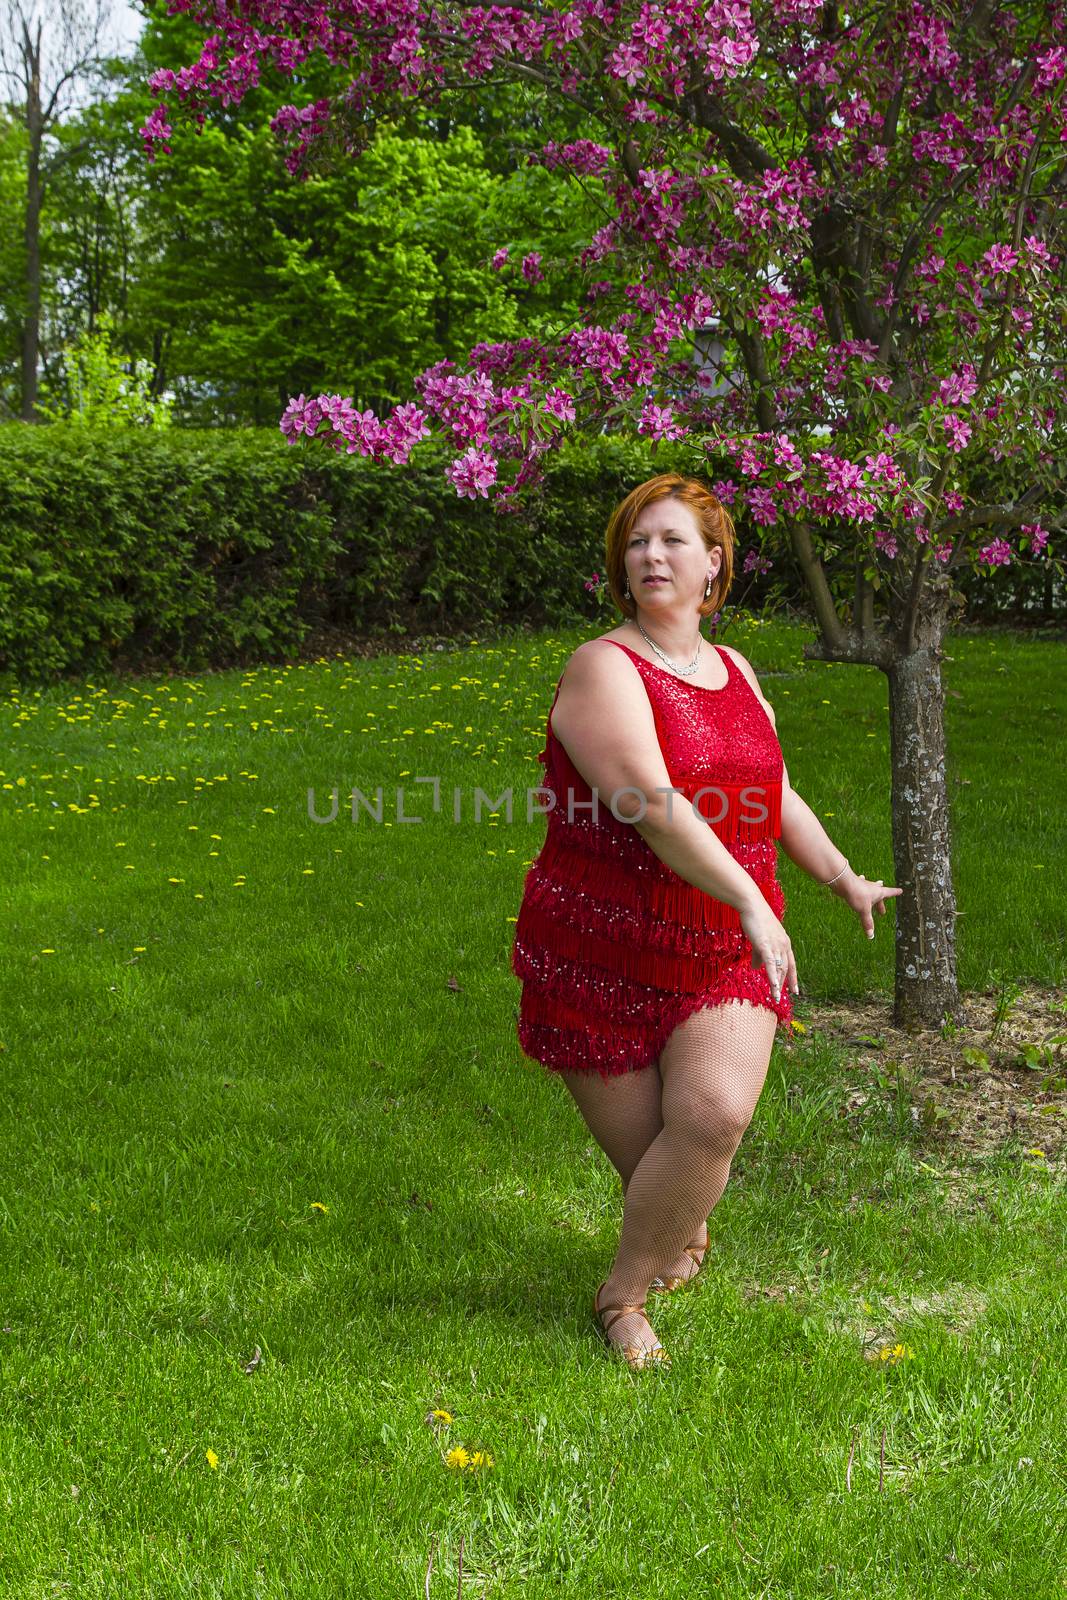 woman wearing a red dress dancing under a cherry tree in bloom